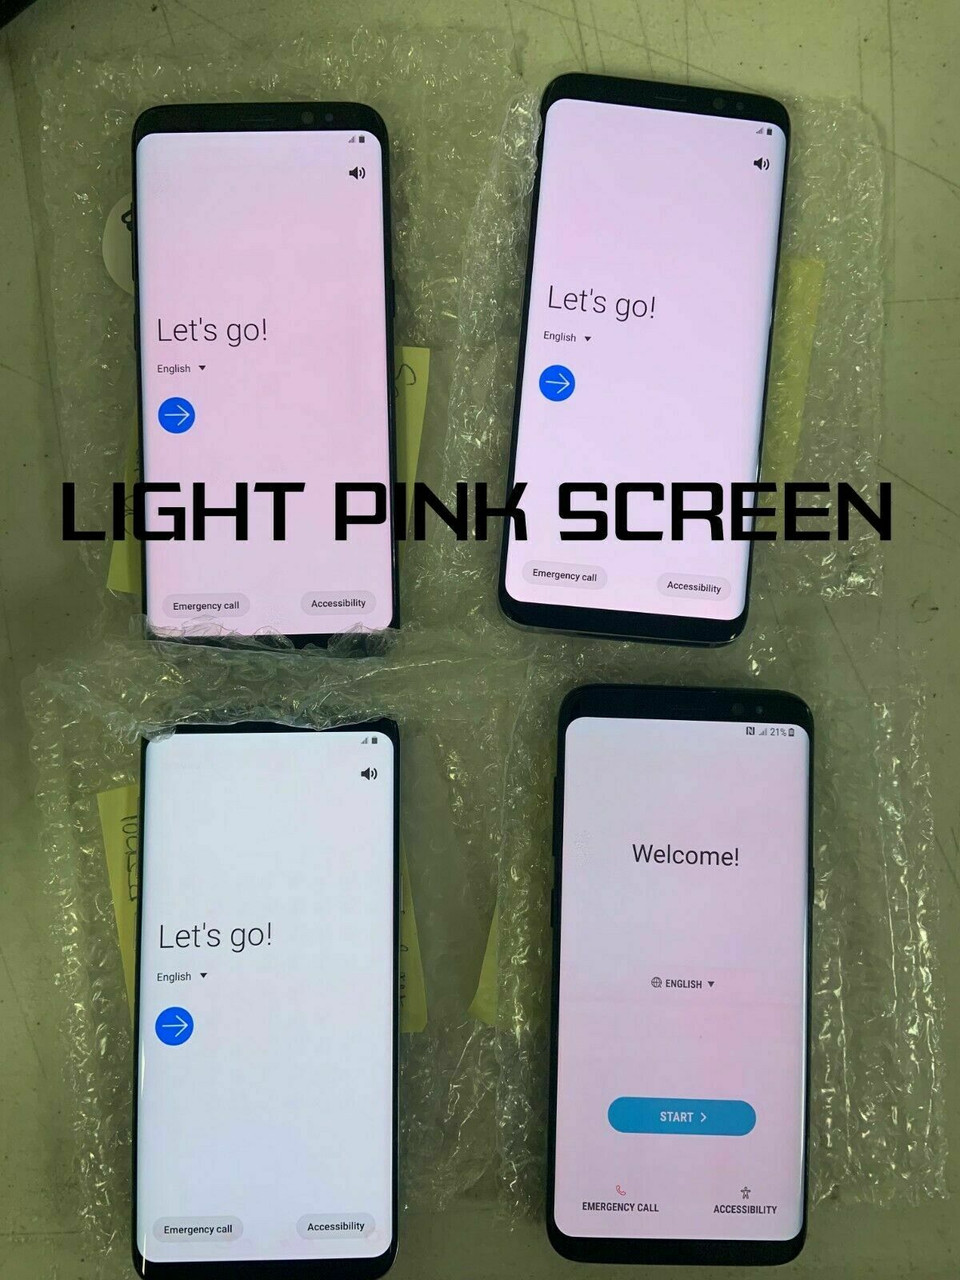 Google Pixel 3a Android Smartphone Shaded Pink Screen